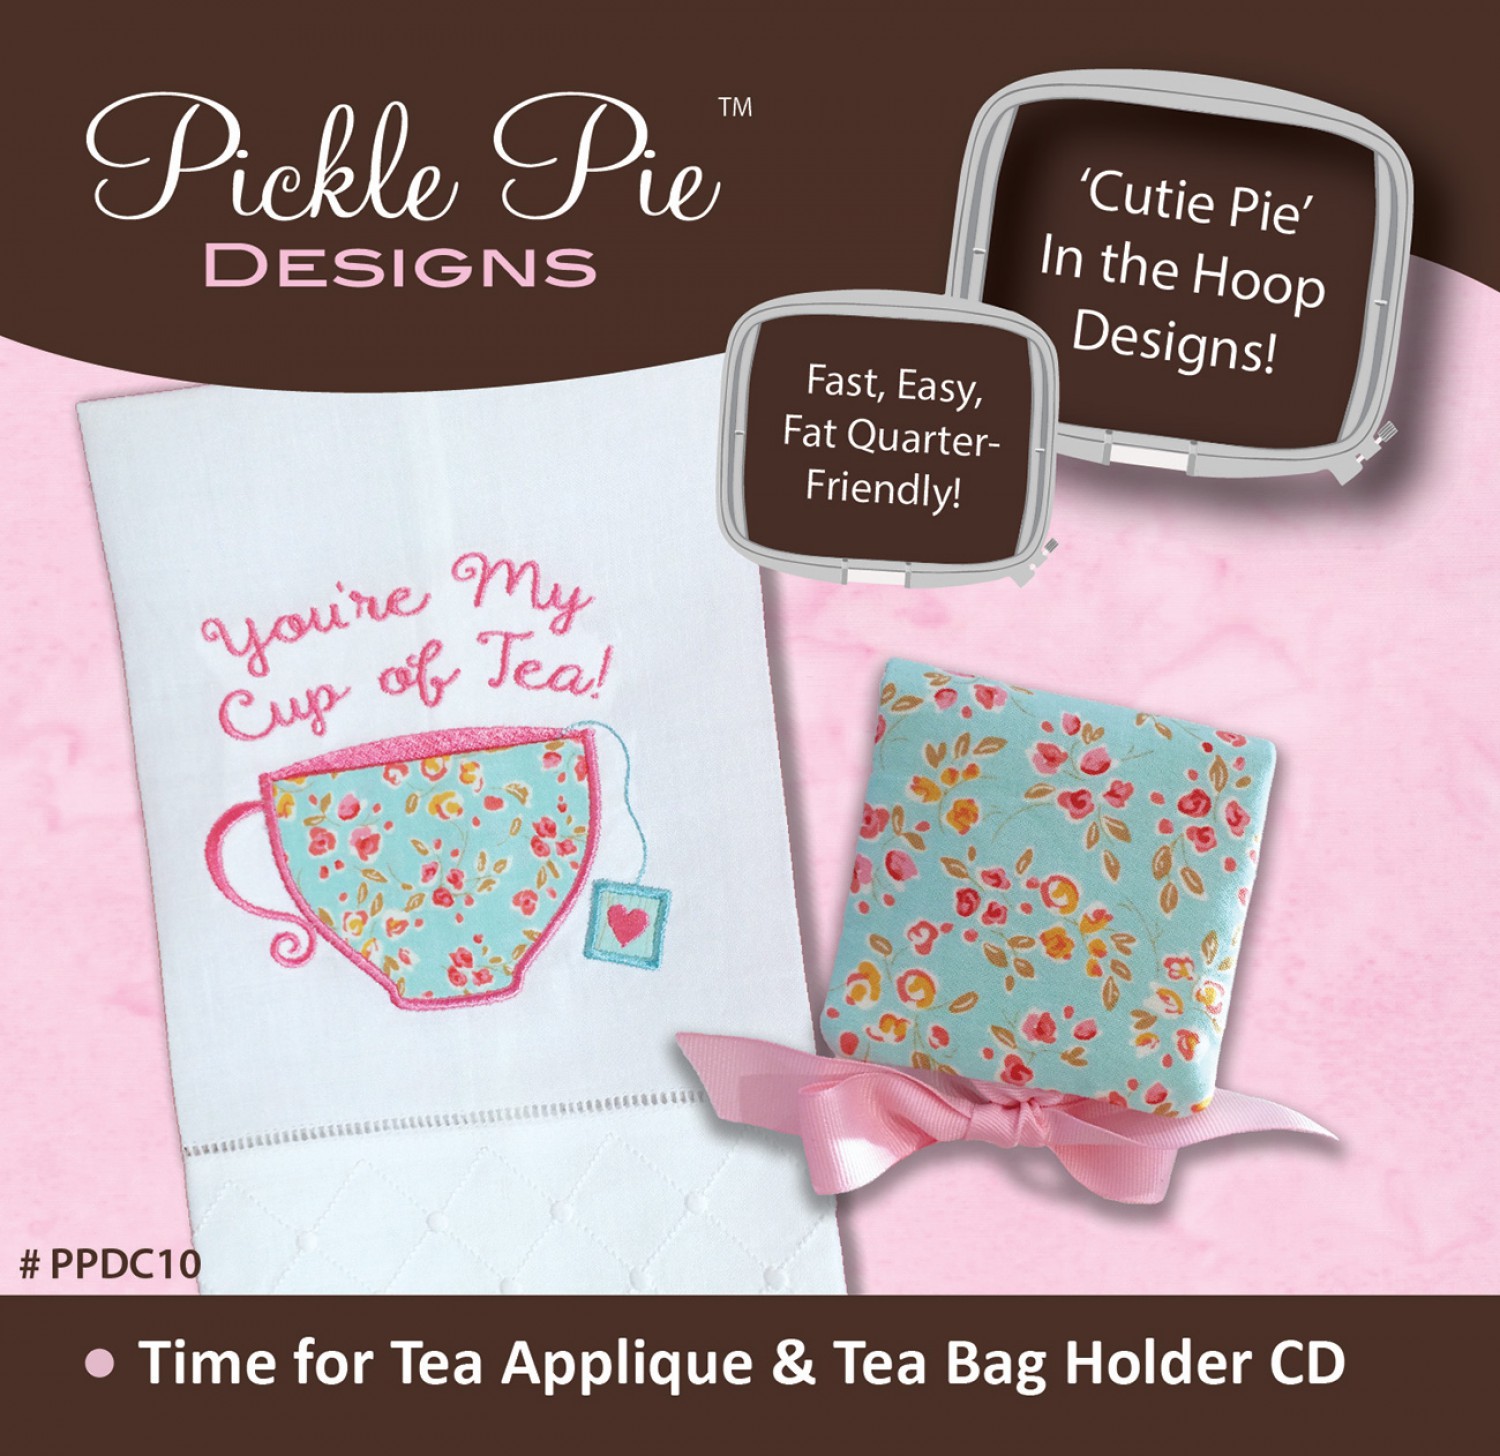 Time for Tea Applique & Tea Bag Holder Collection Embroidery Designs on CD-ROM by Pickle Pie Designs